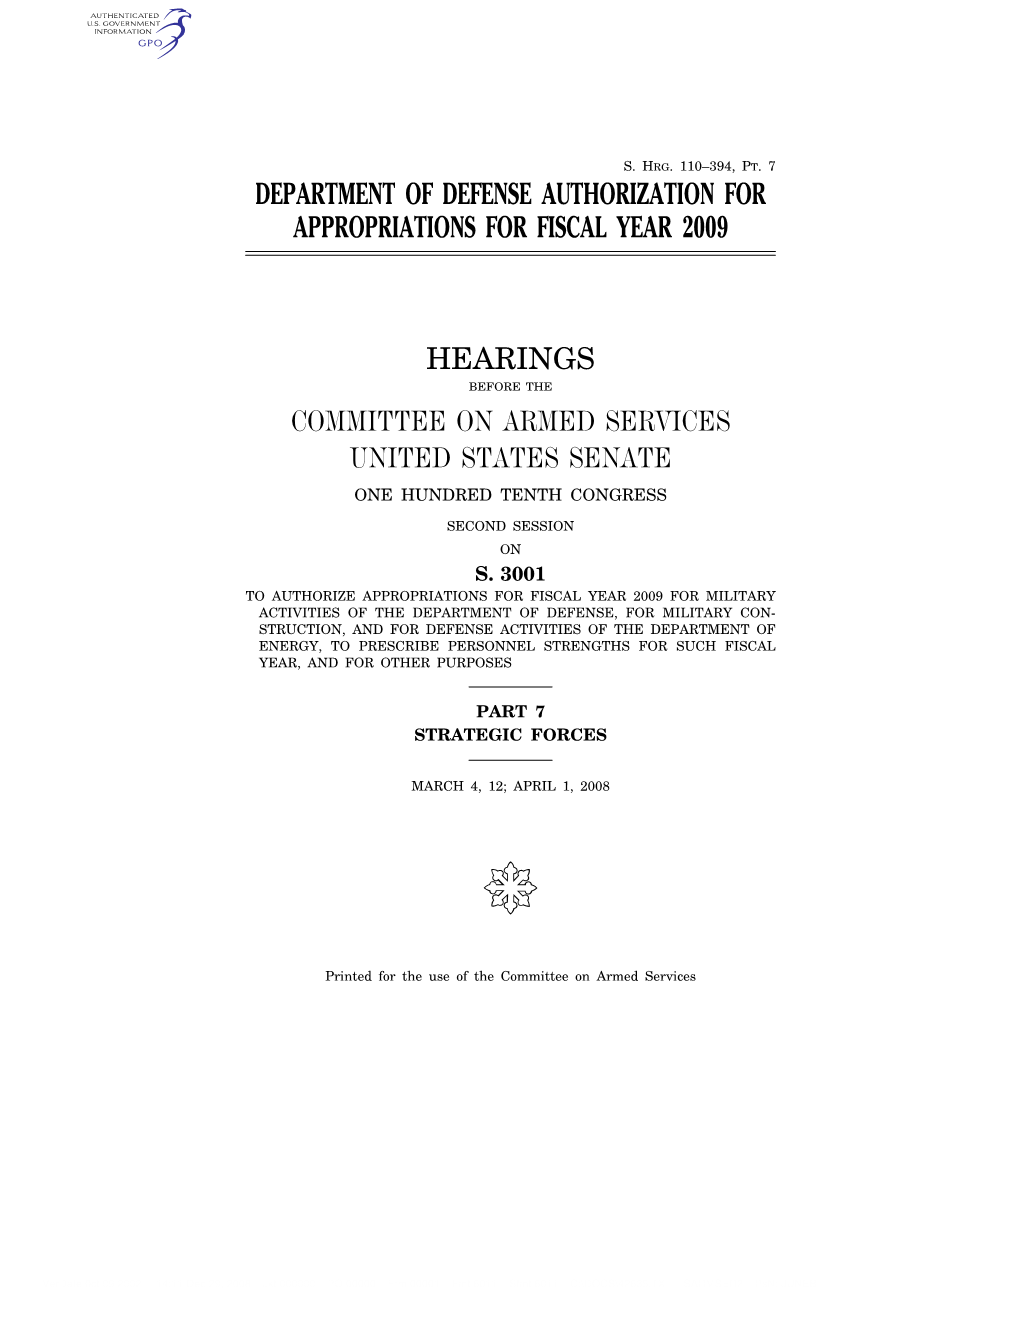 Department of Defense Authorization for Appropriations for Fiscal Year 2009